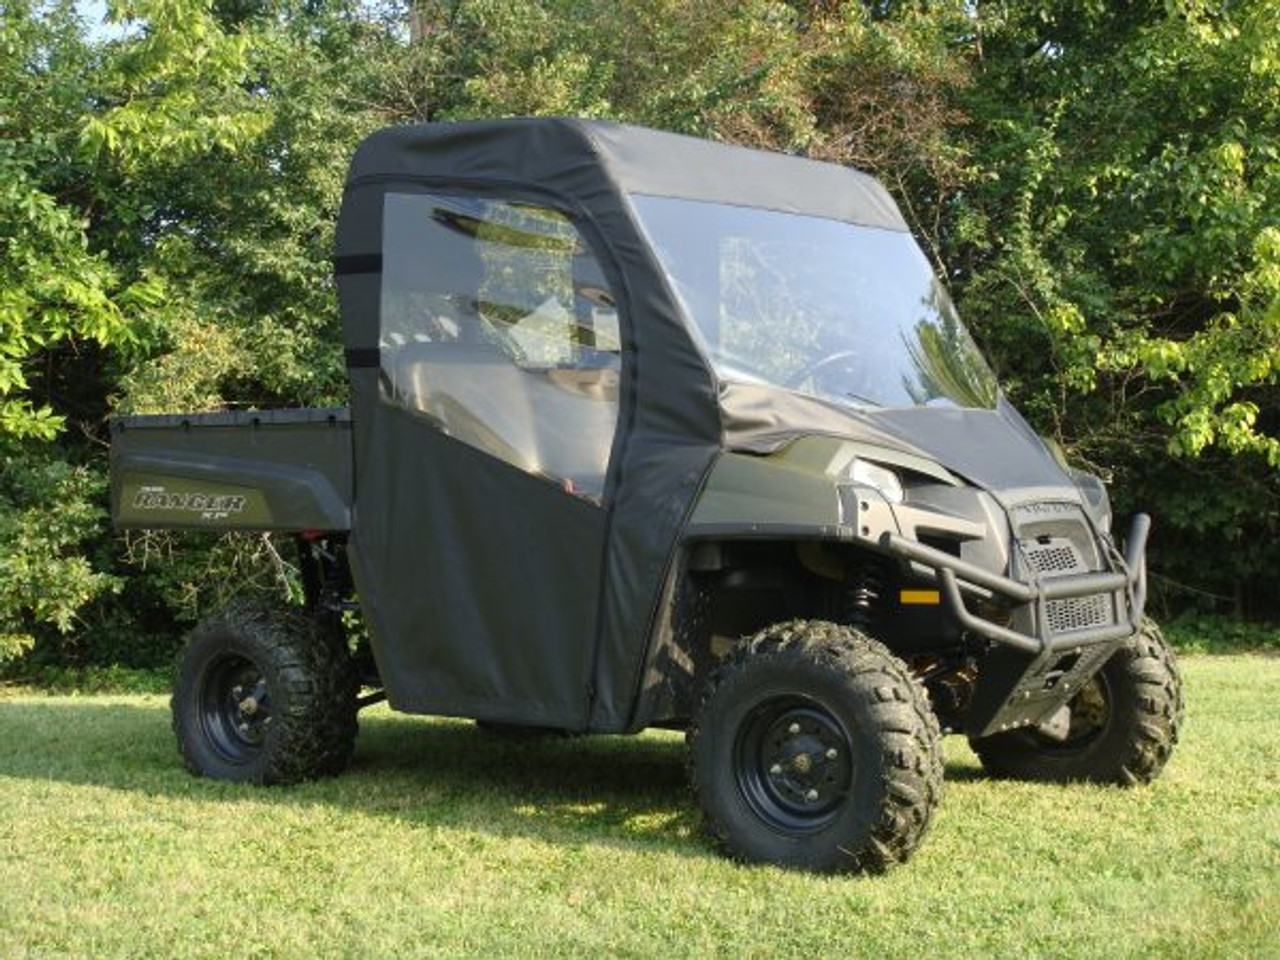 3 Star side x side Polaris Ranger full-size 500/700 full cab enclosure with vinyl windshield front and side angle view